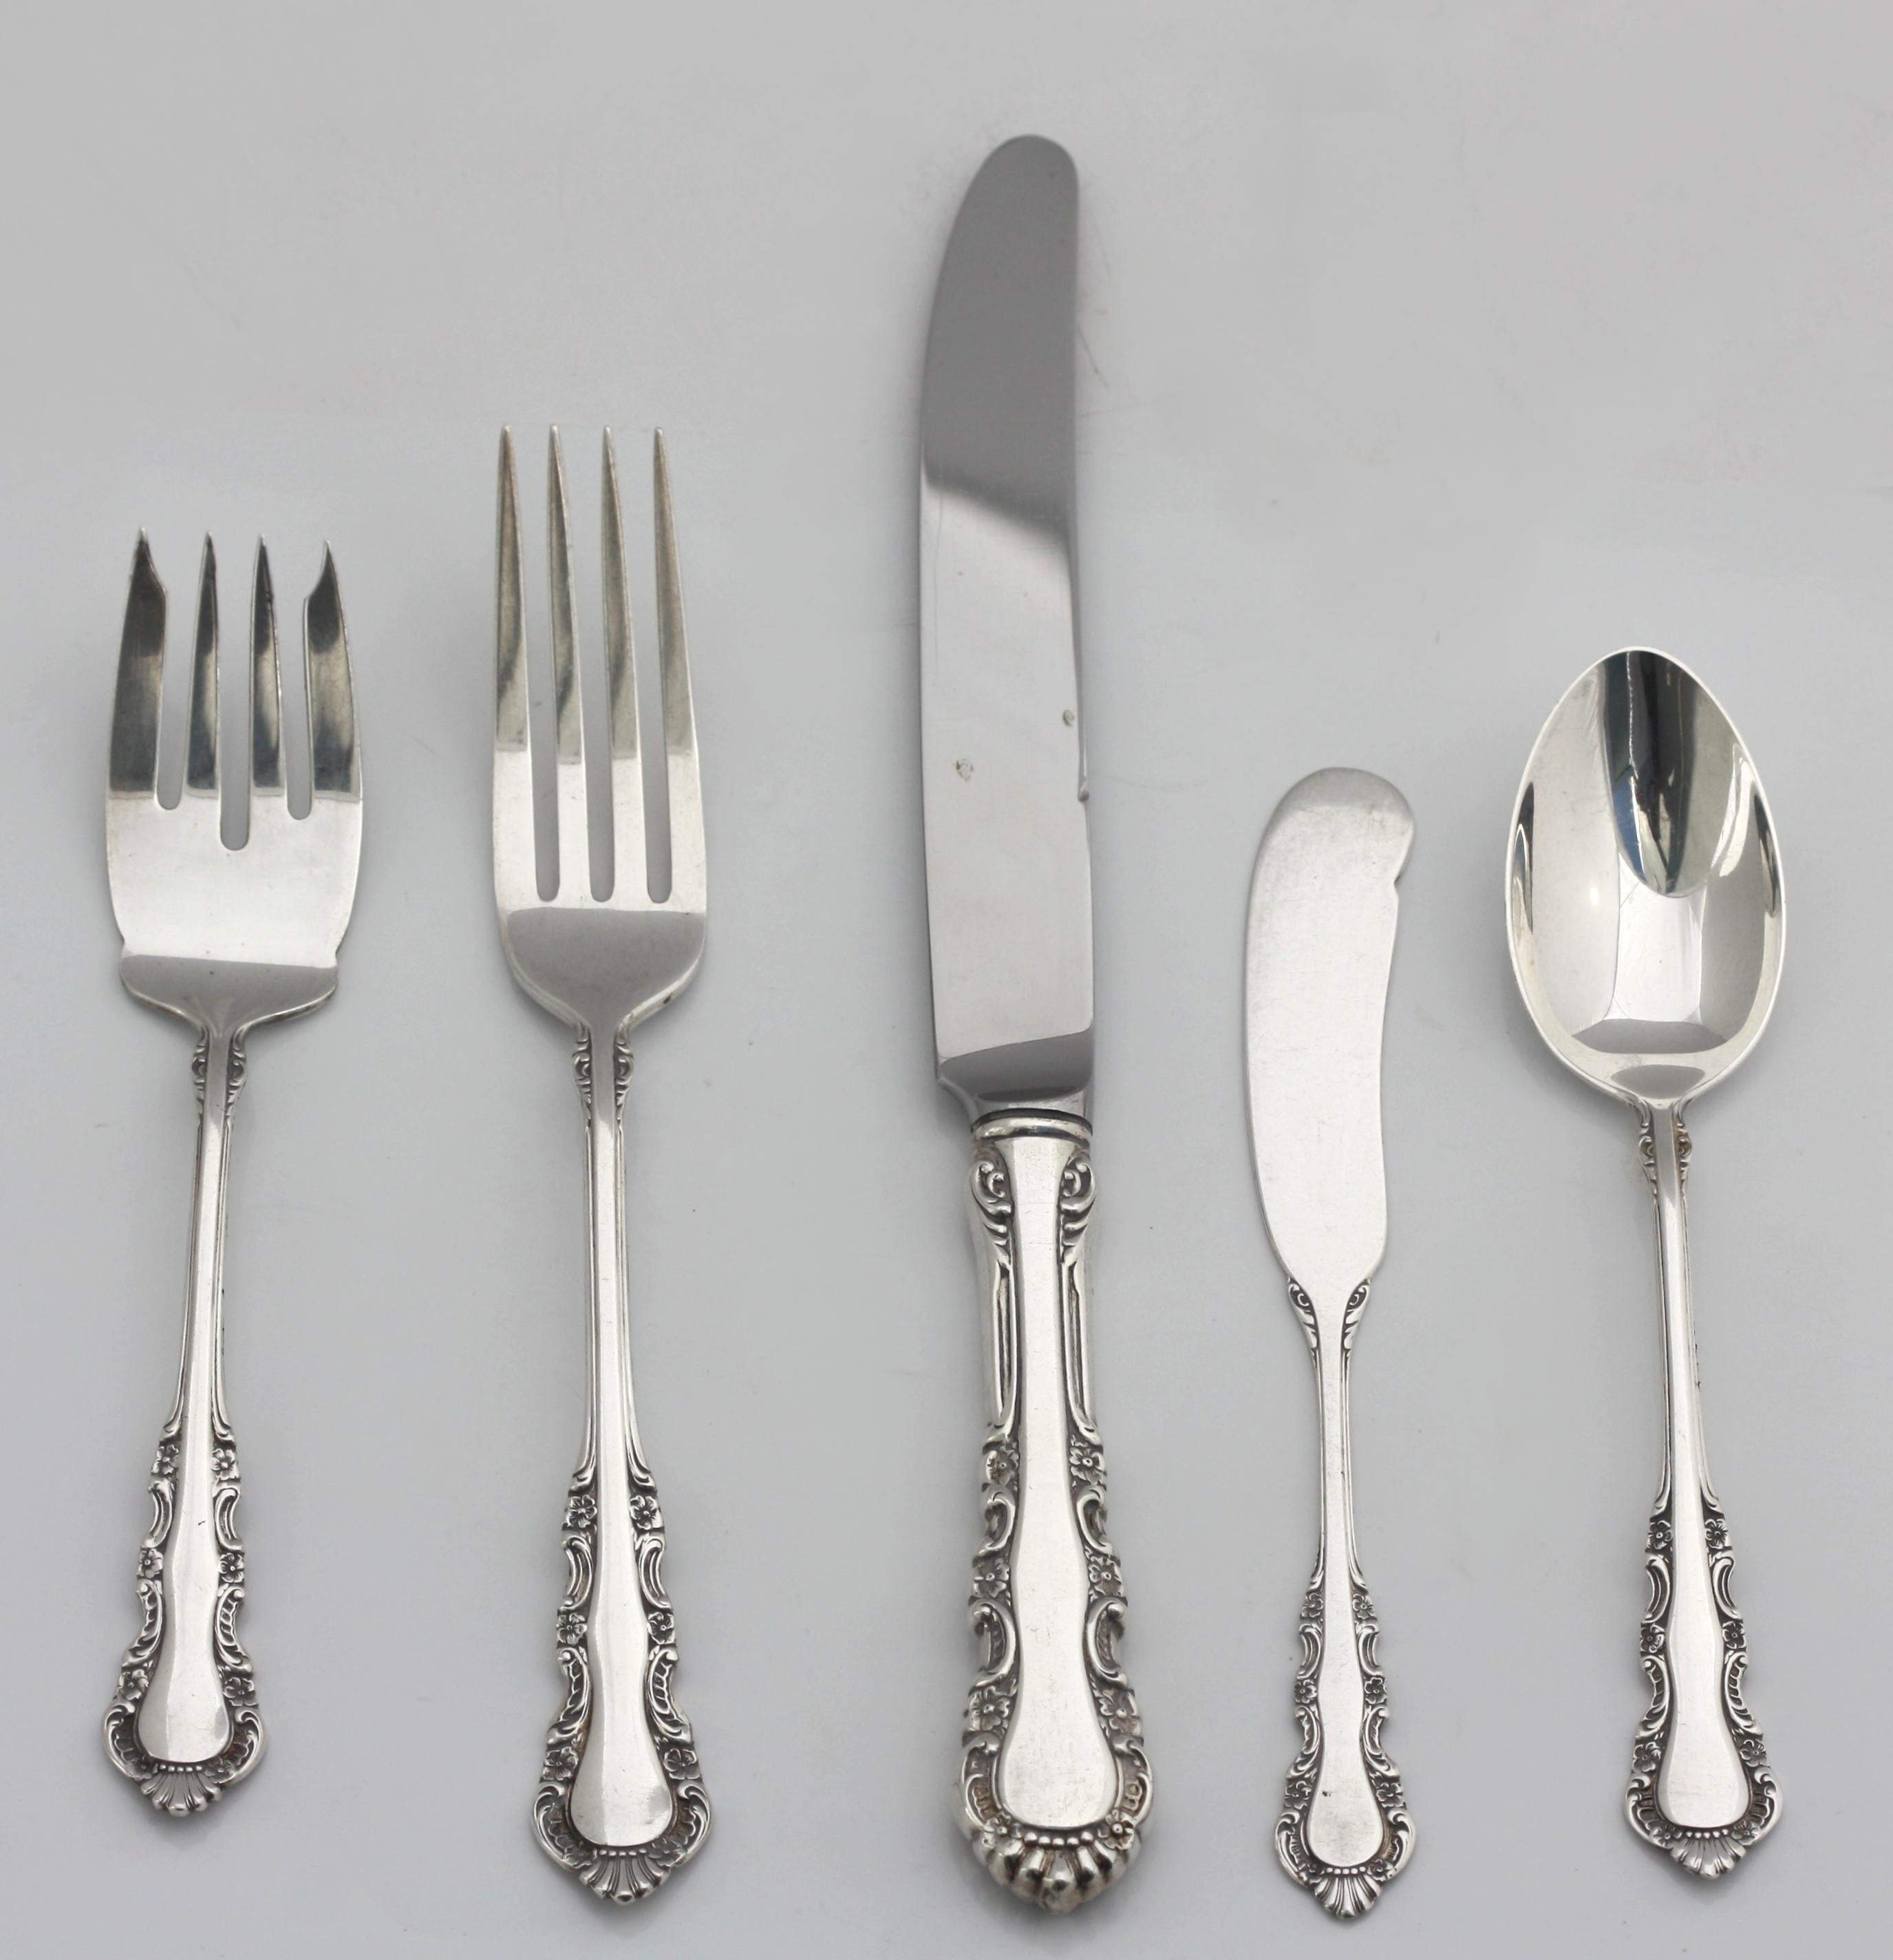  Reed & Barton Sterling Silver Fifty-Nine Piece Flatware Service  For Sale 3